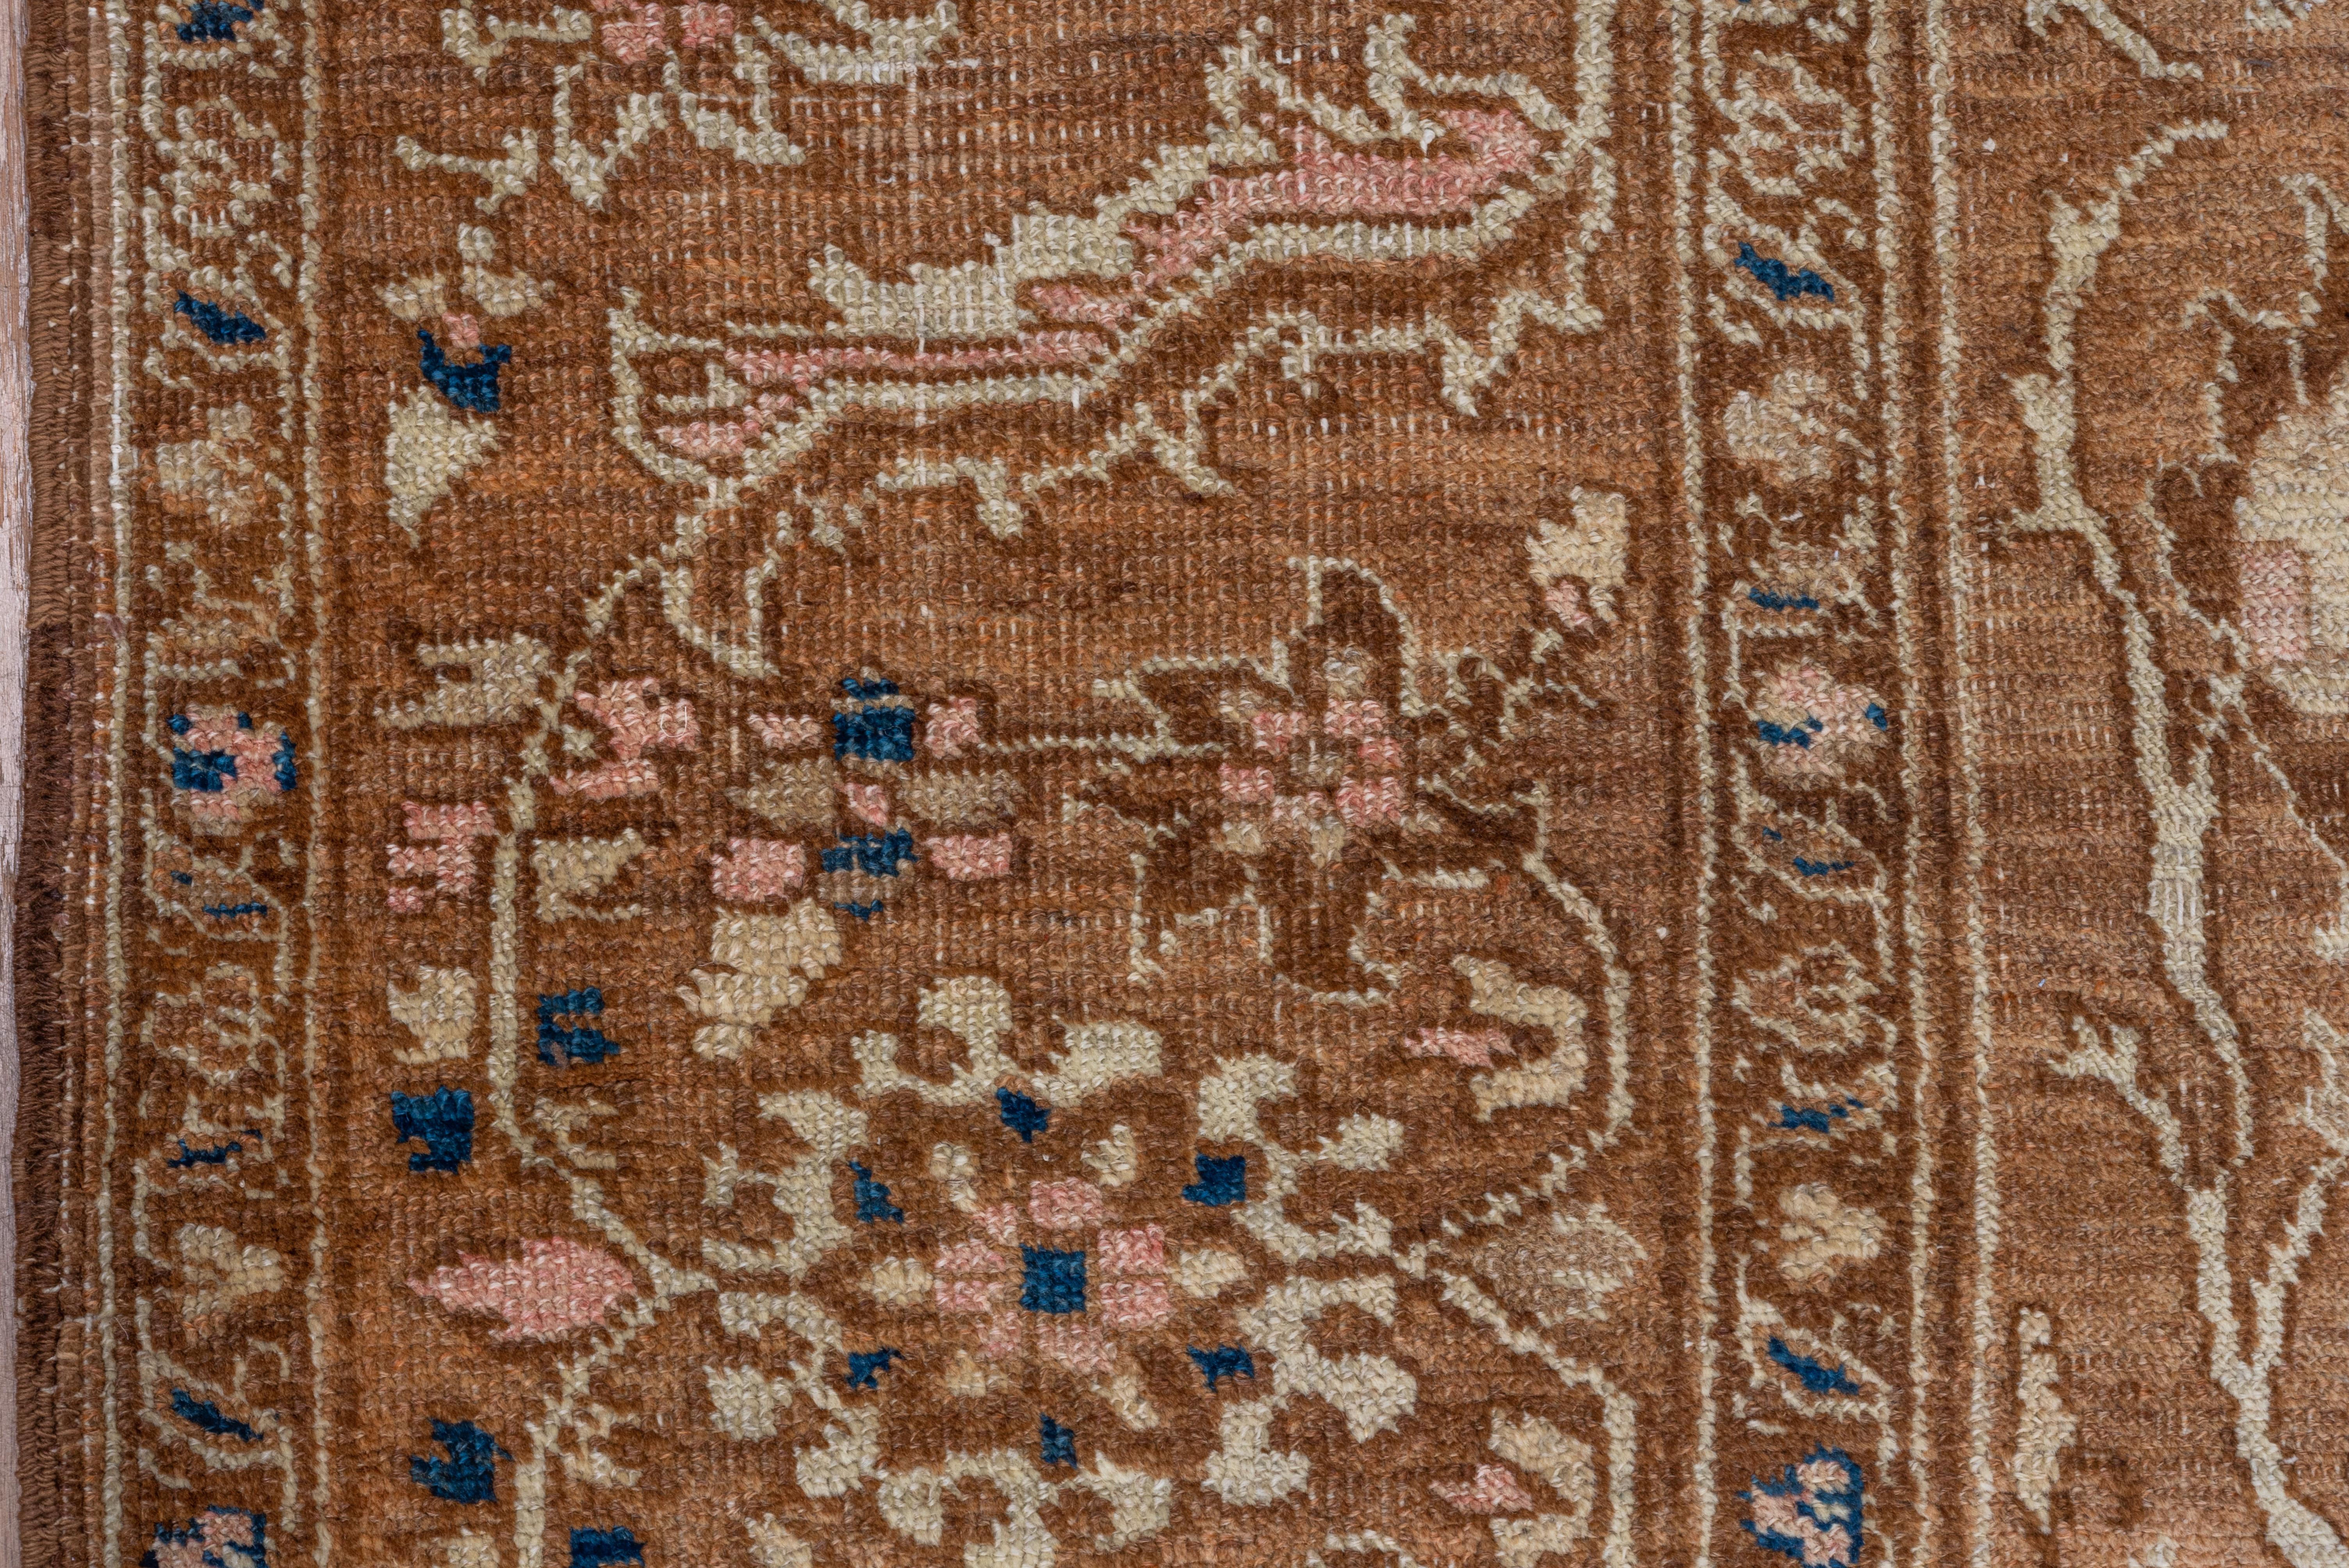 Antique Persian Heriz Serapi Rug, Tan Field with Blue & Pink Accents, Circa 1910 For Sale 1